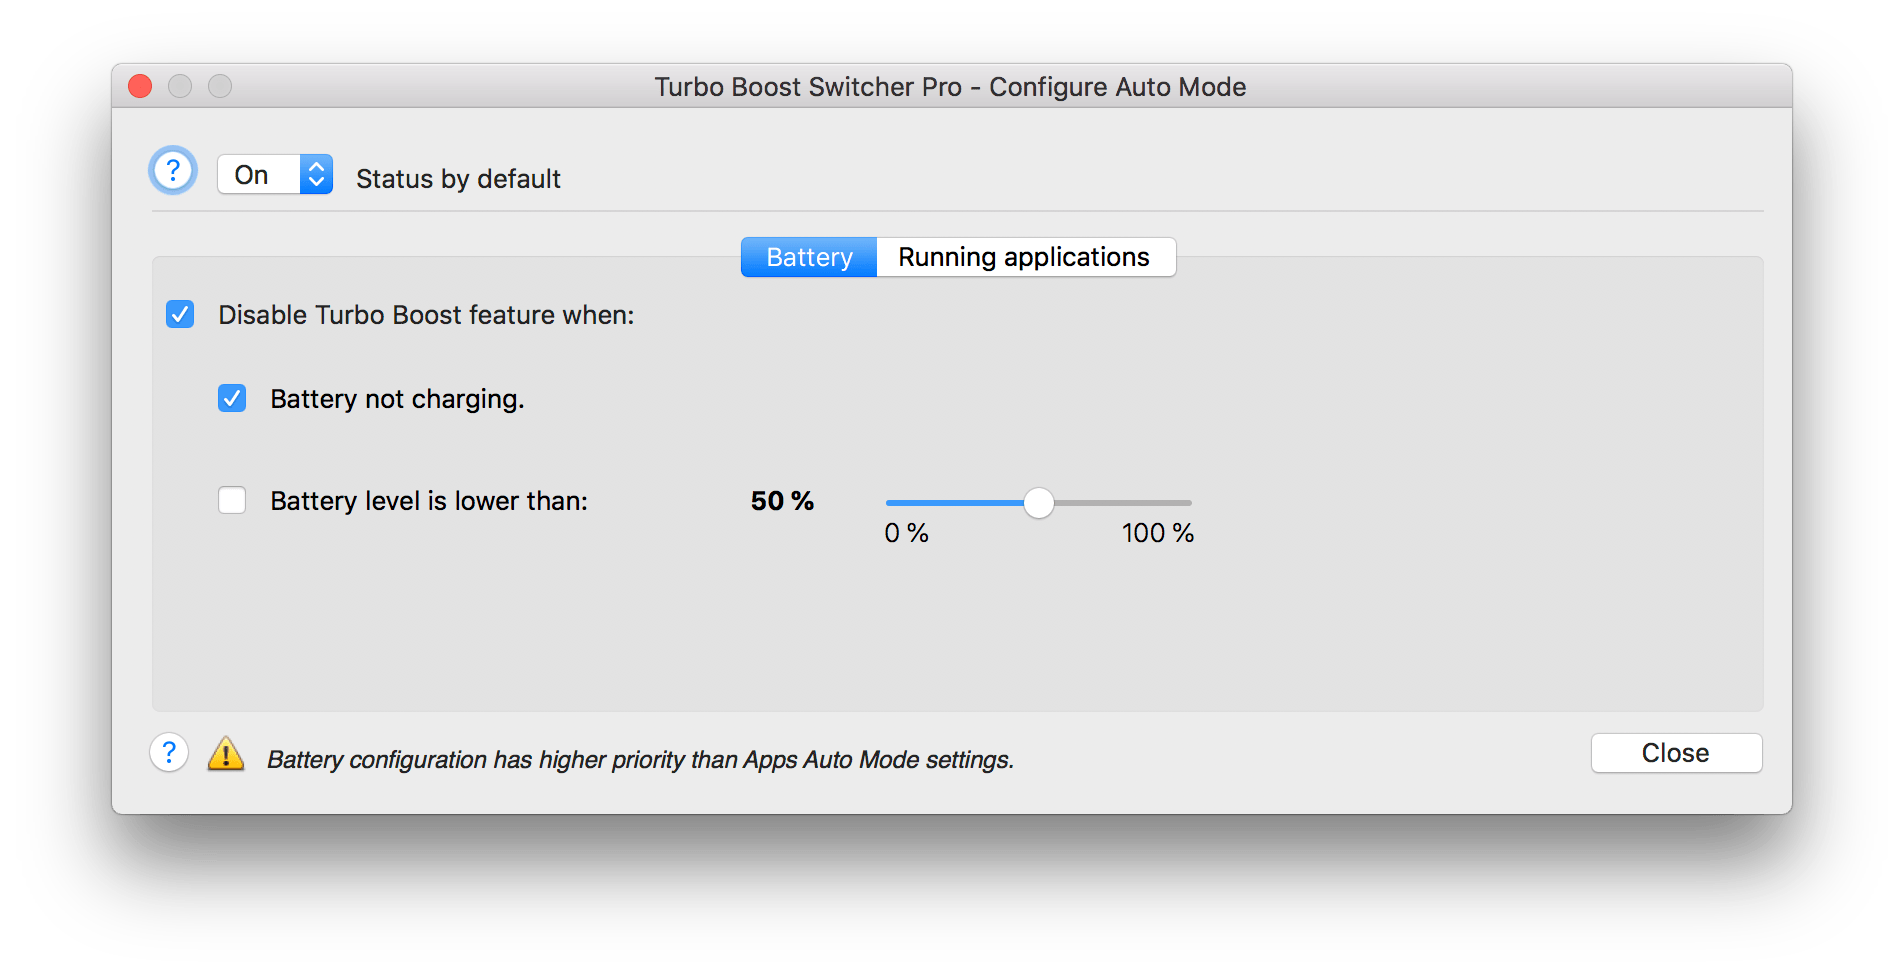 macos turbo boost switcher